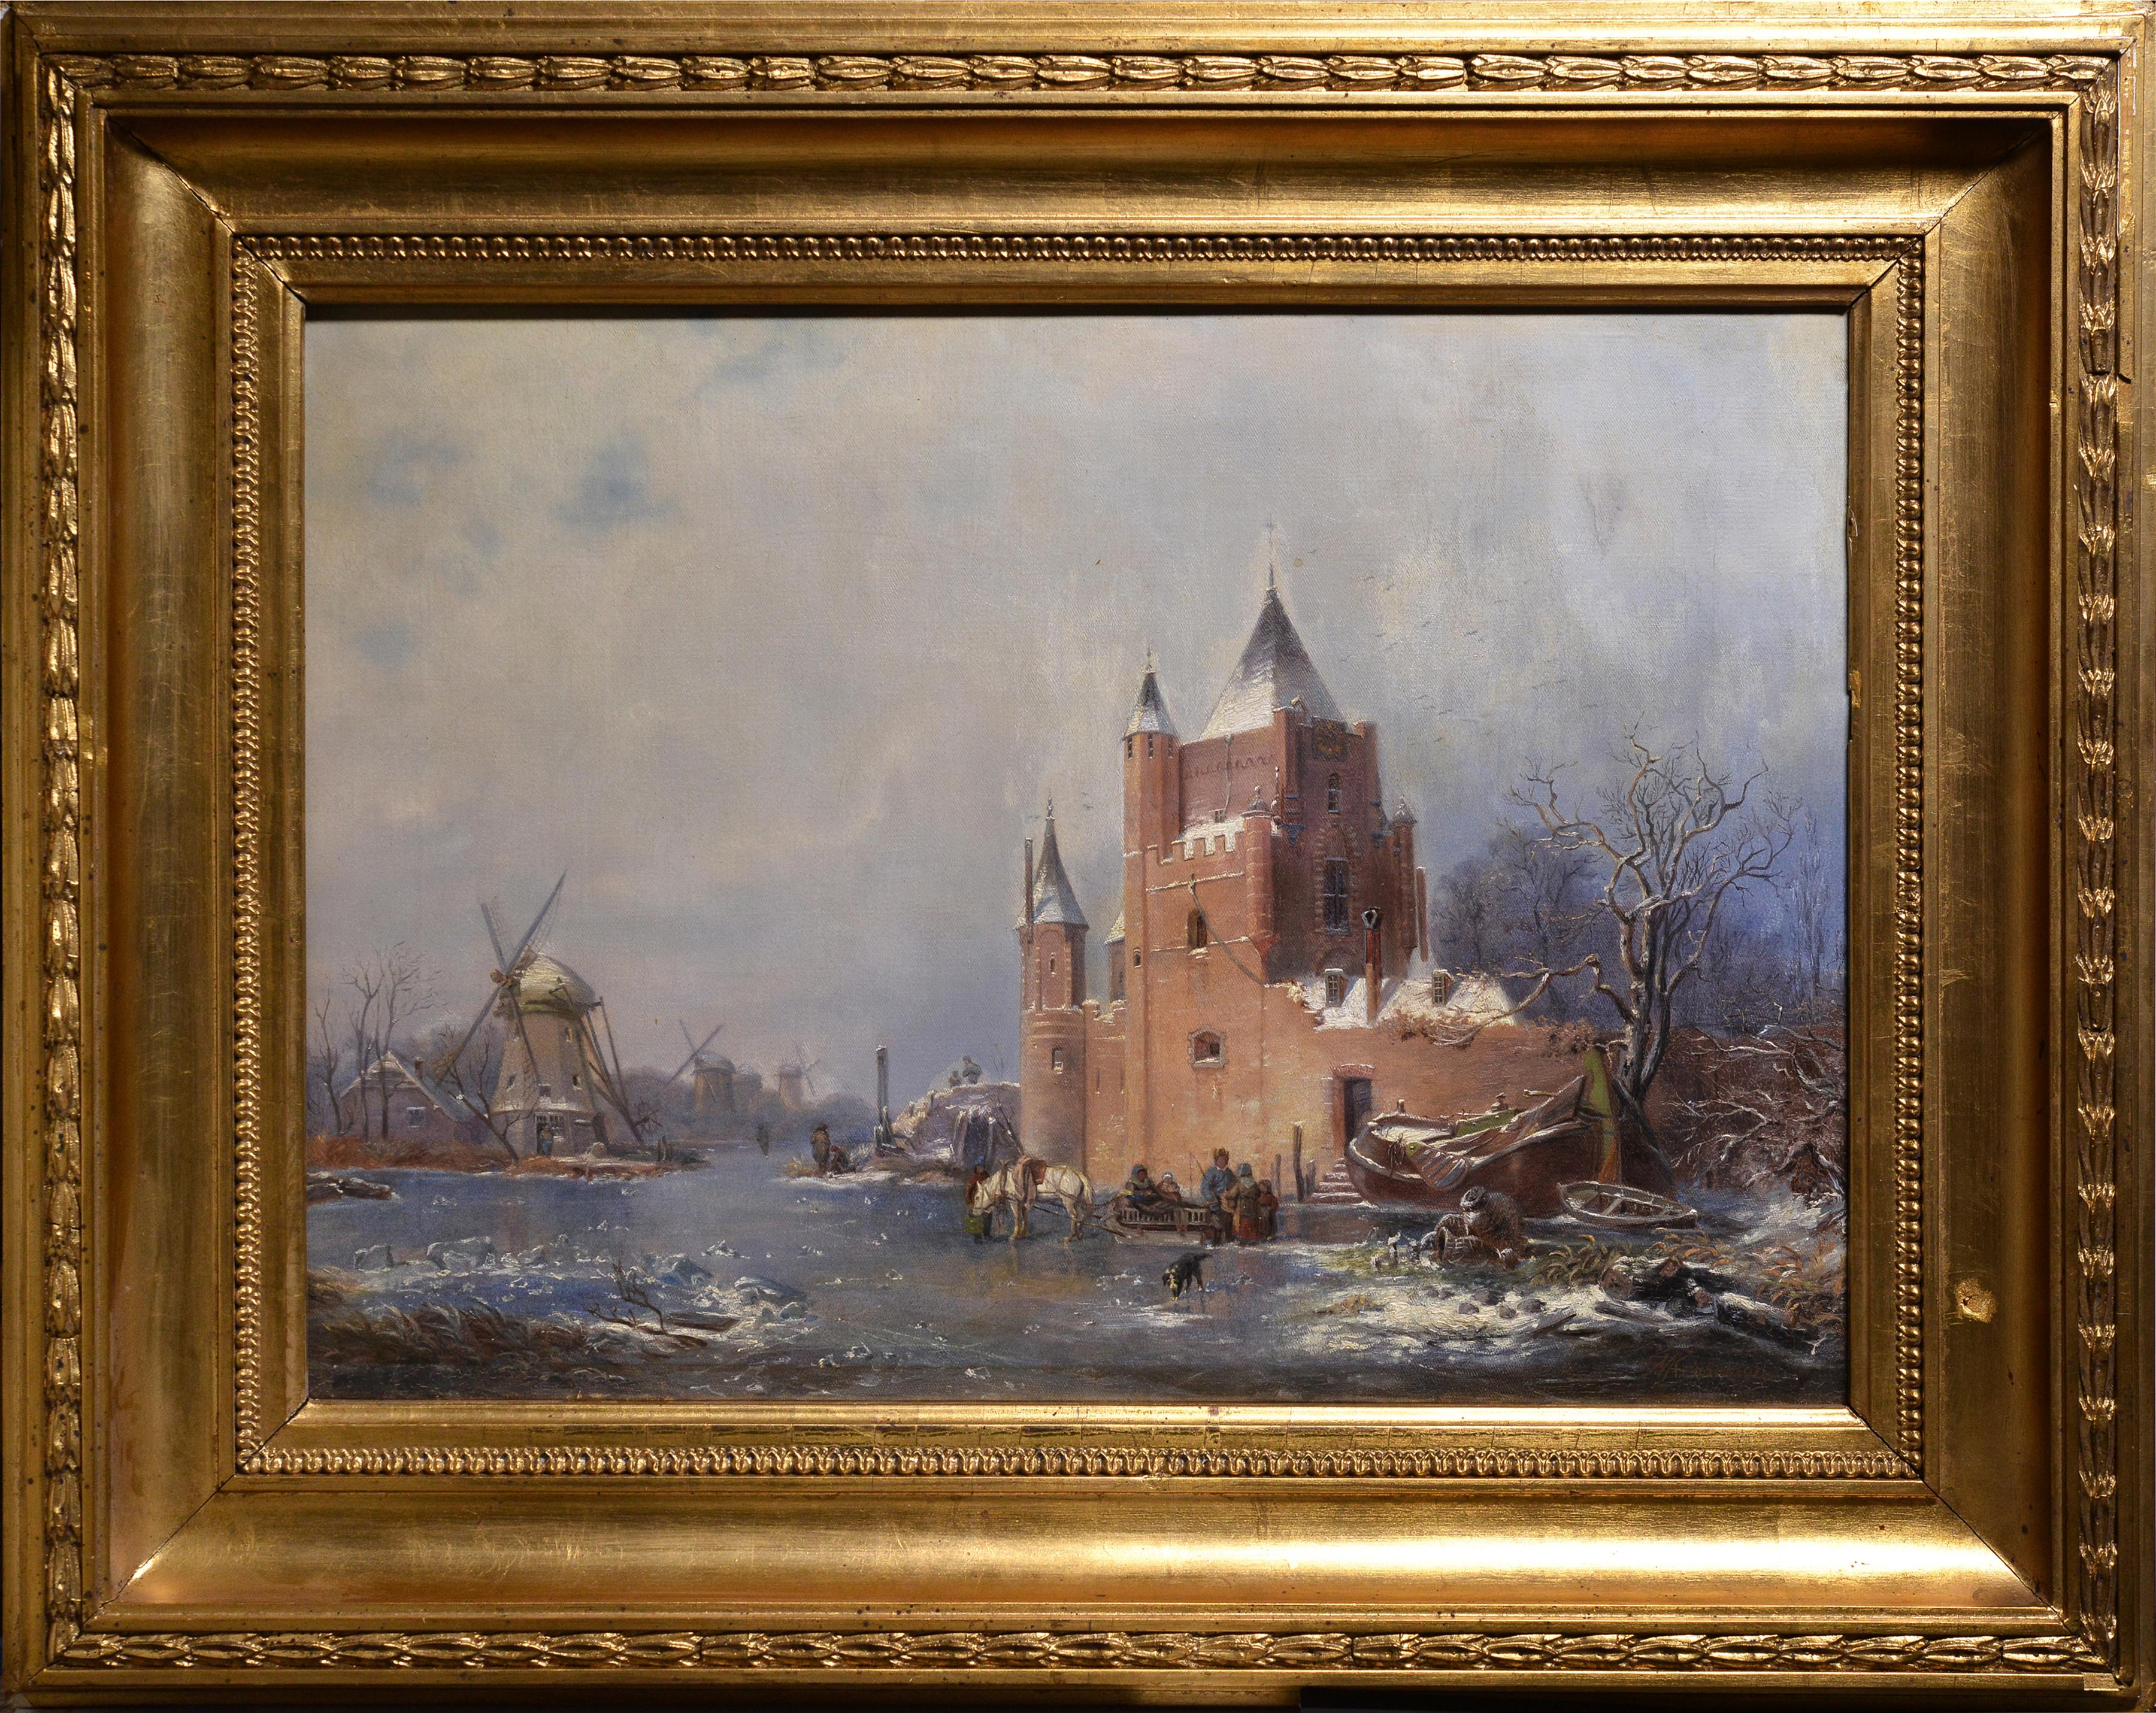 Unknown Figurative Painting - Castle and Windmills at Frozen Pond Dutch Winter Landscape 19th century Oil